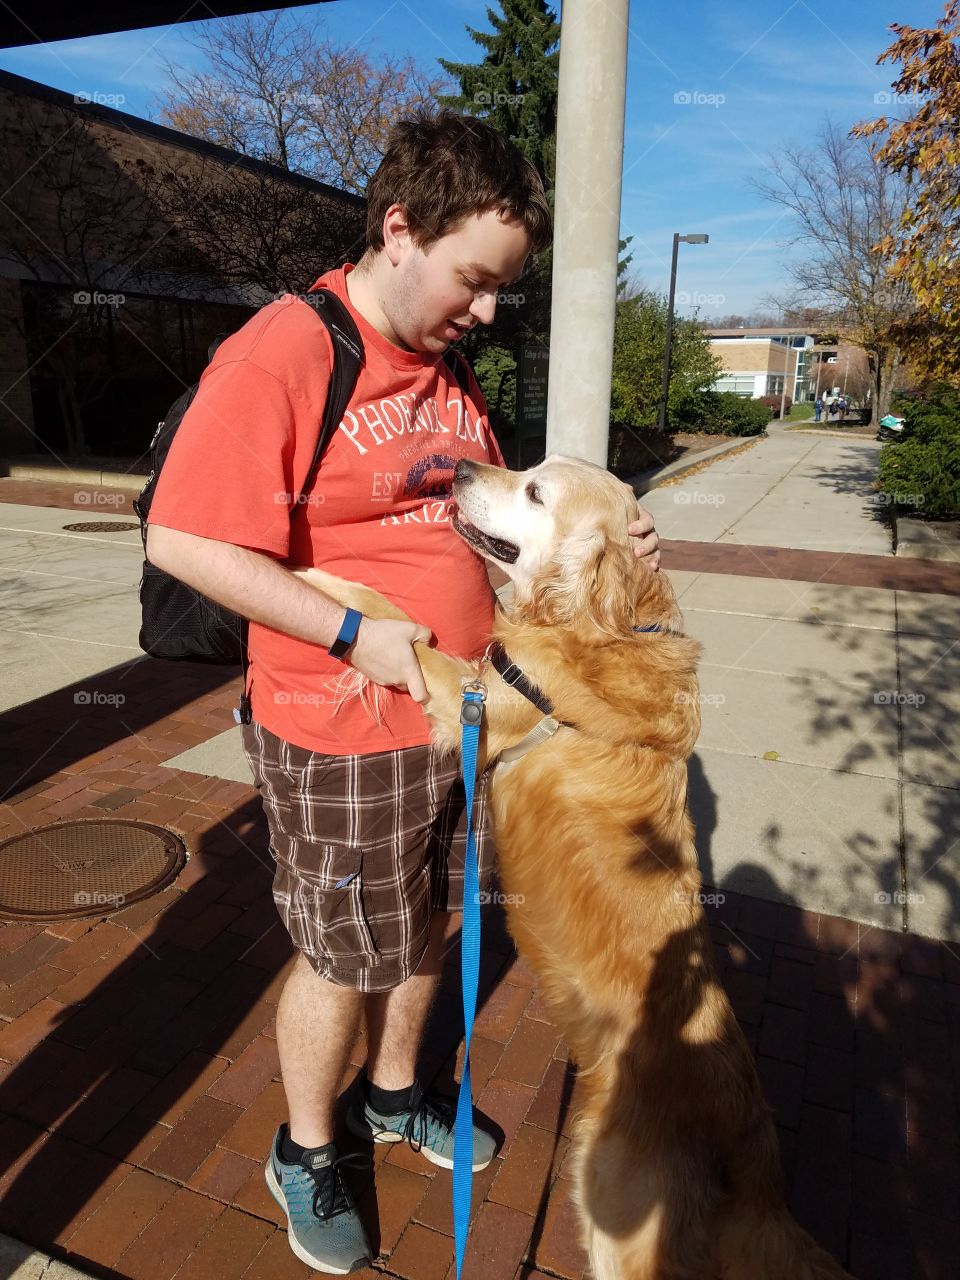 I walked Buddy the golden retriever outside of the vet school for moral support to my friends add they came outside after their quiz